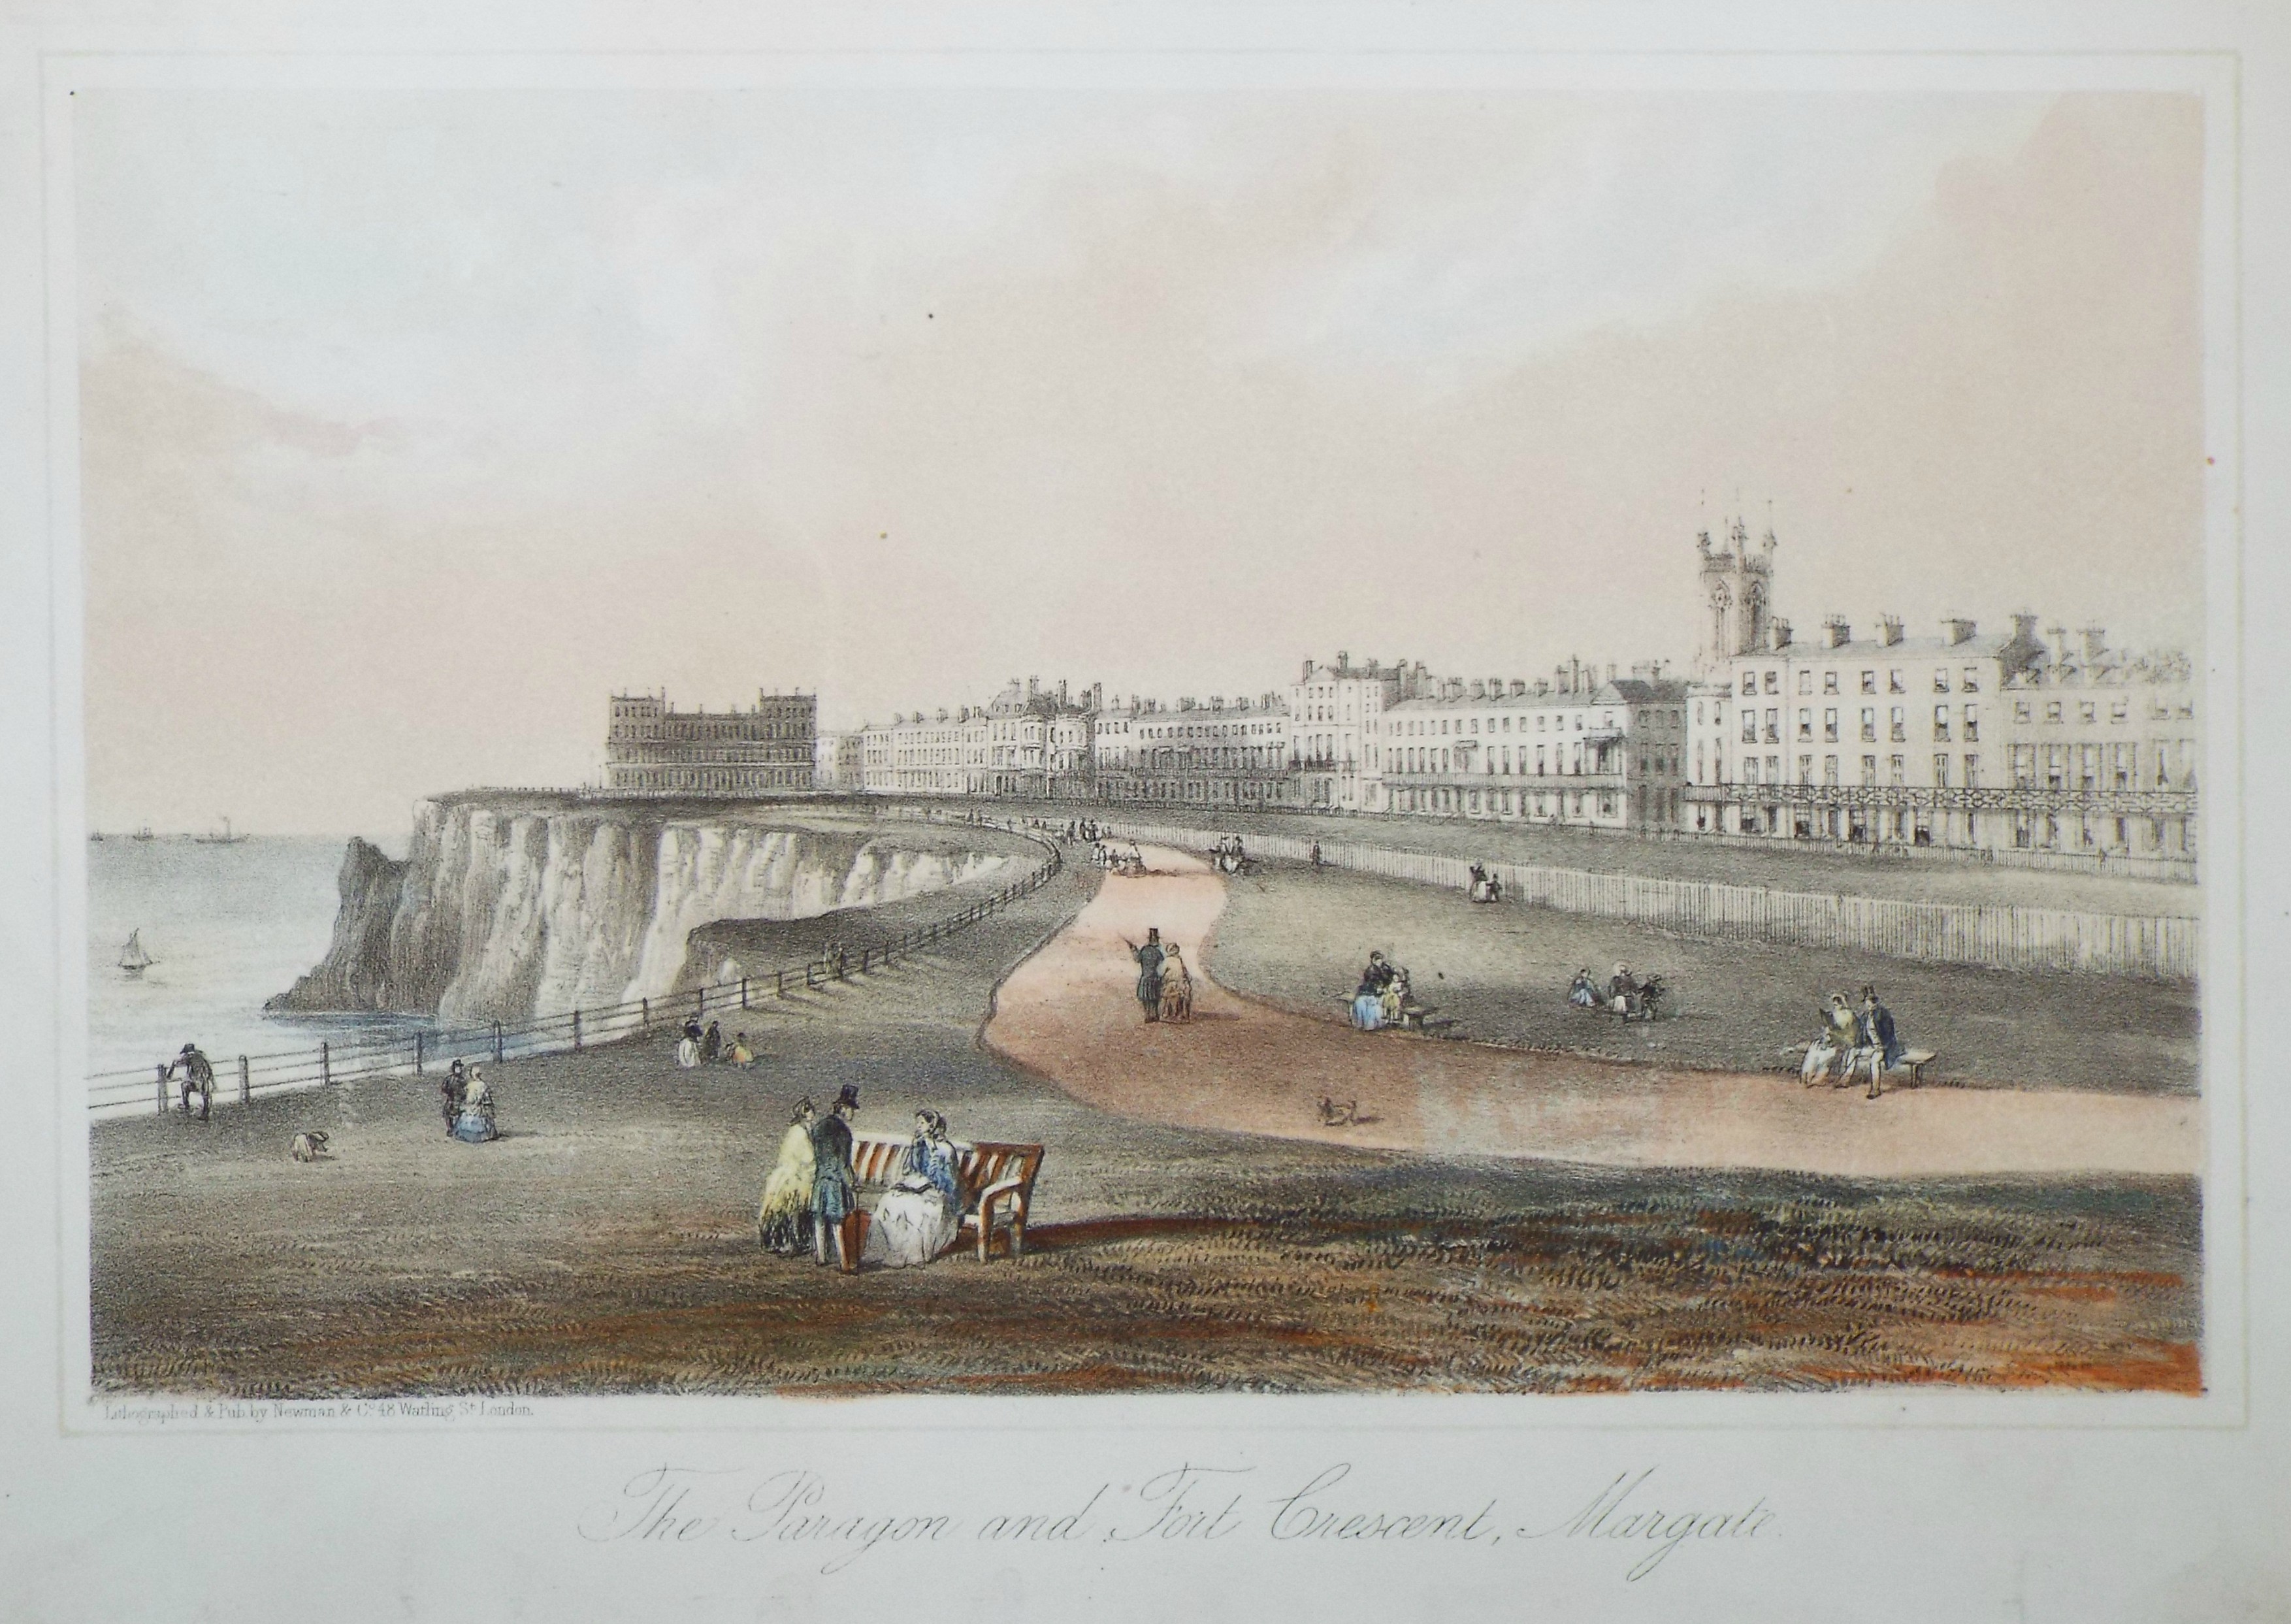 Lithograph - The Paragon and Fort Crescent, Margate.